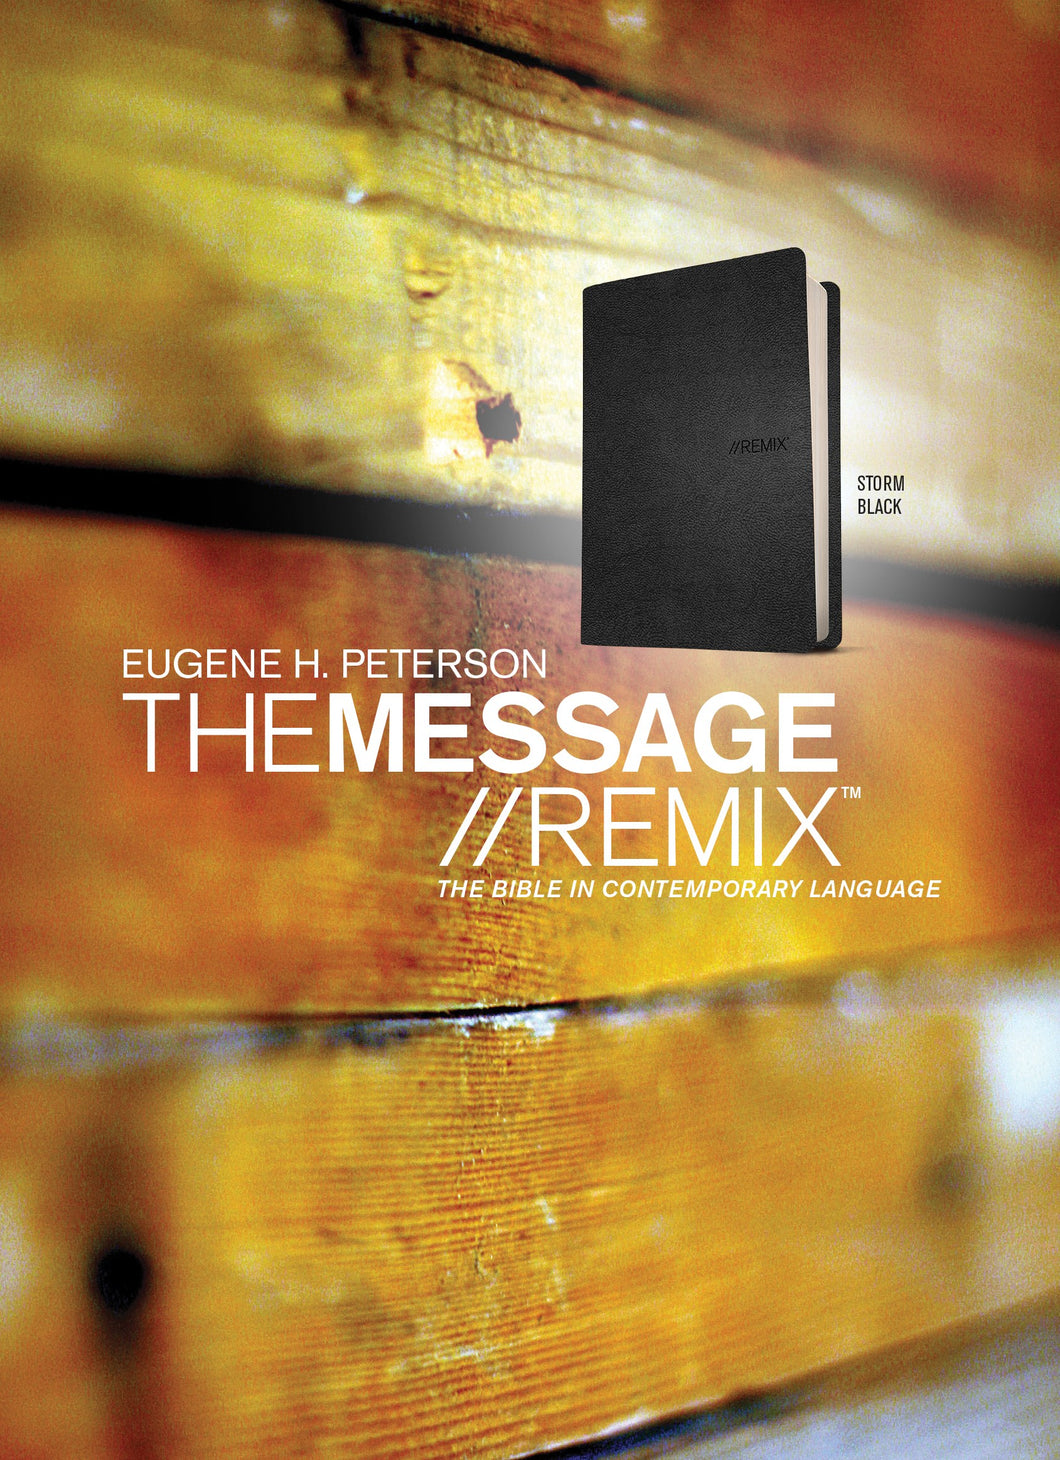 The Message Remix 2.0 (Numbered Edition) (Repack)-Storm Black LeatherLook